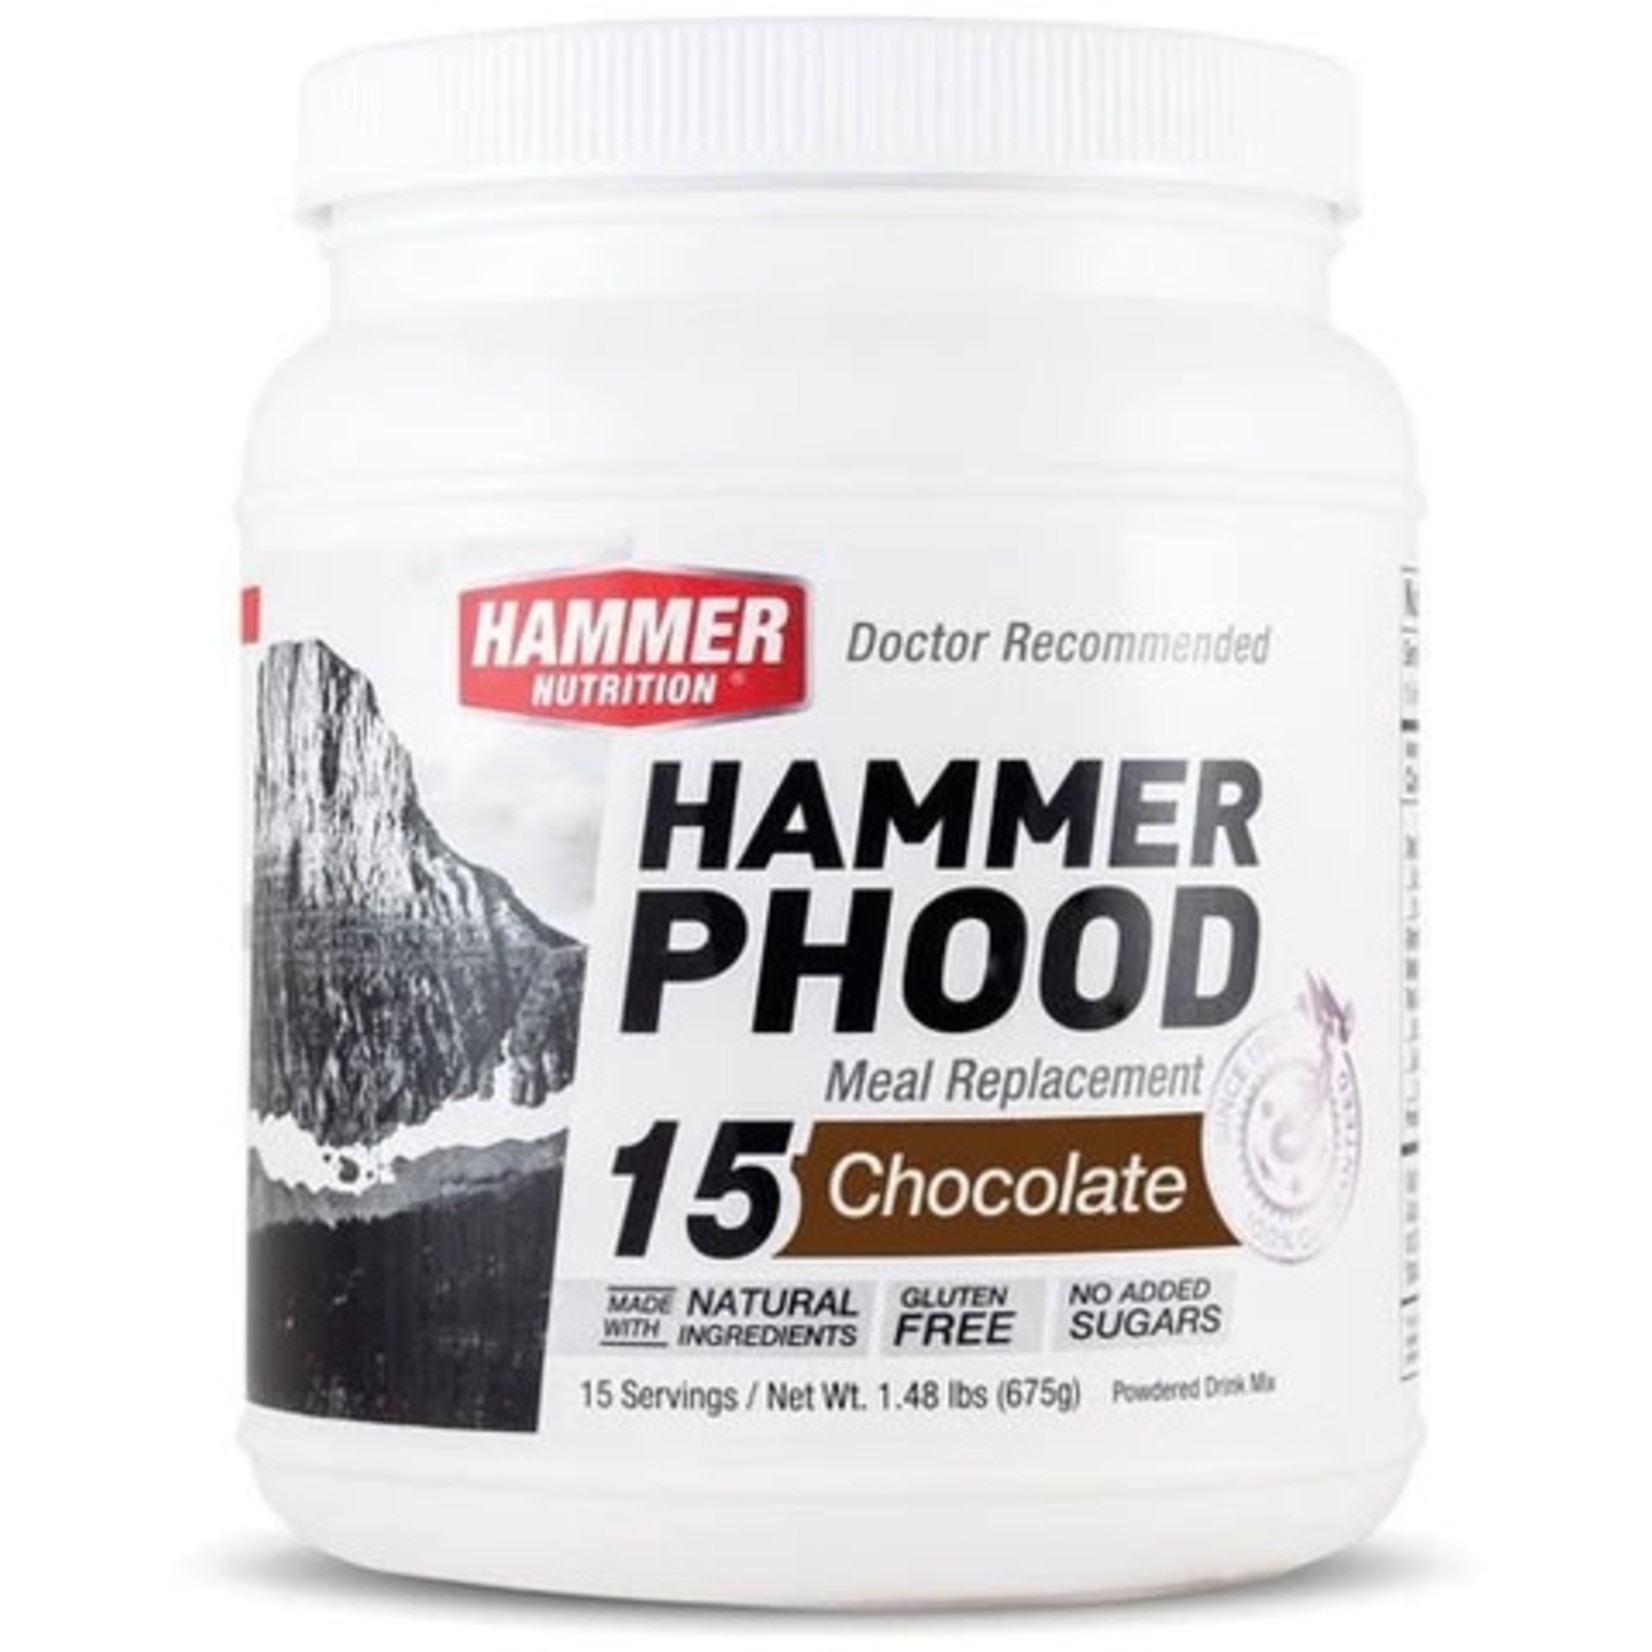 Hammer Nutrition Hammer Phood Meal Replacement 15 servings